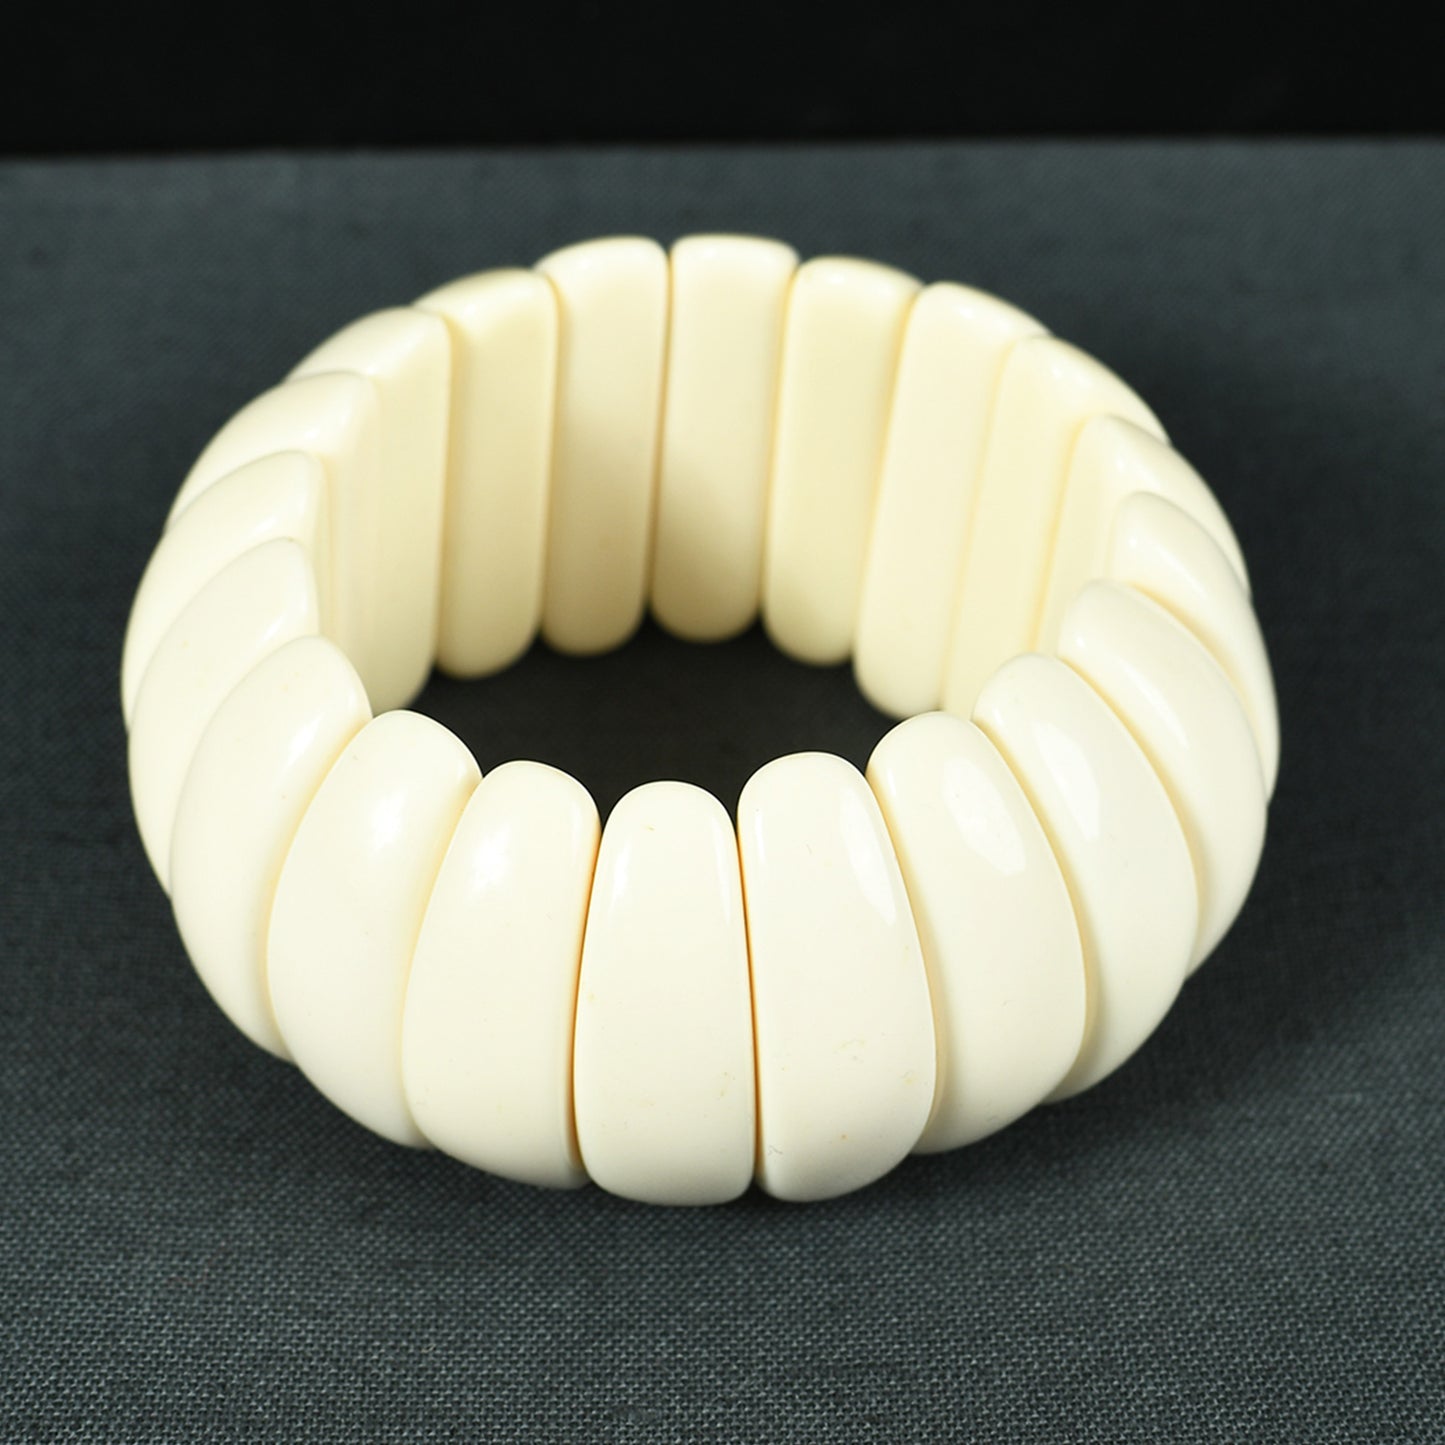 White Beaded Stretchable Bracelet by Bamboo Tree Jewels